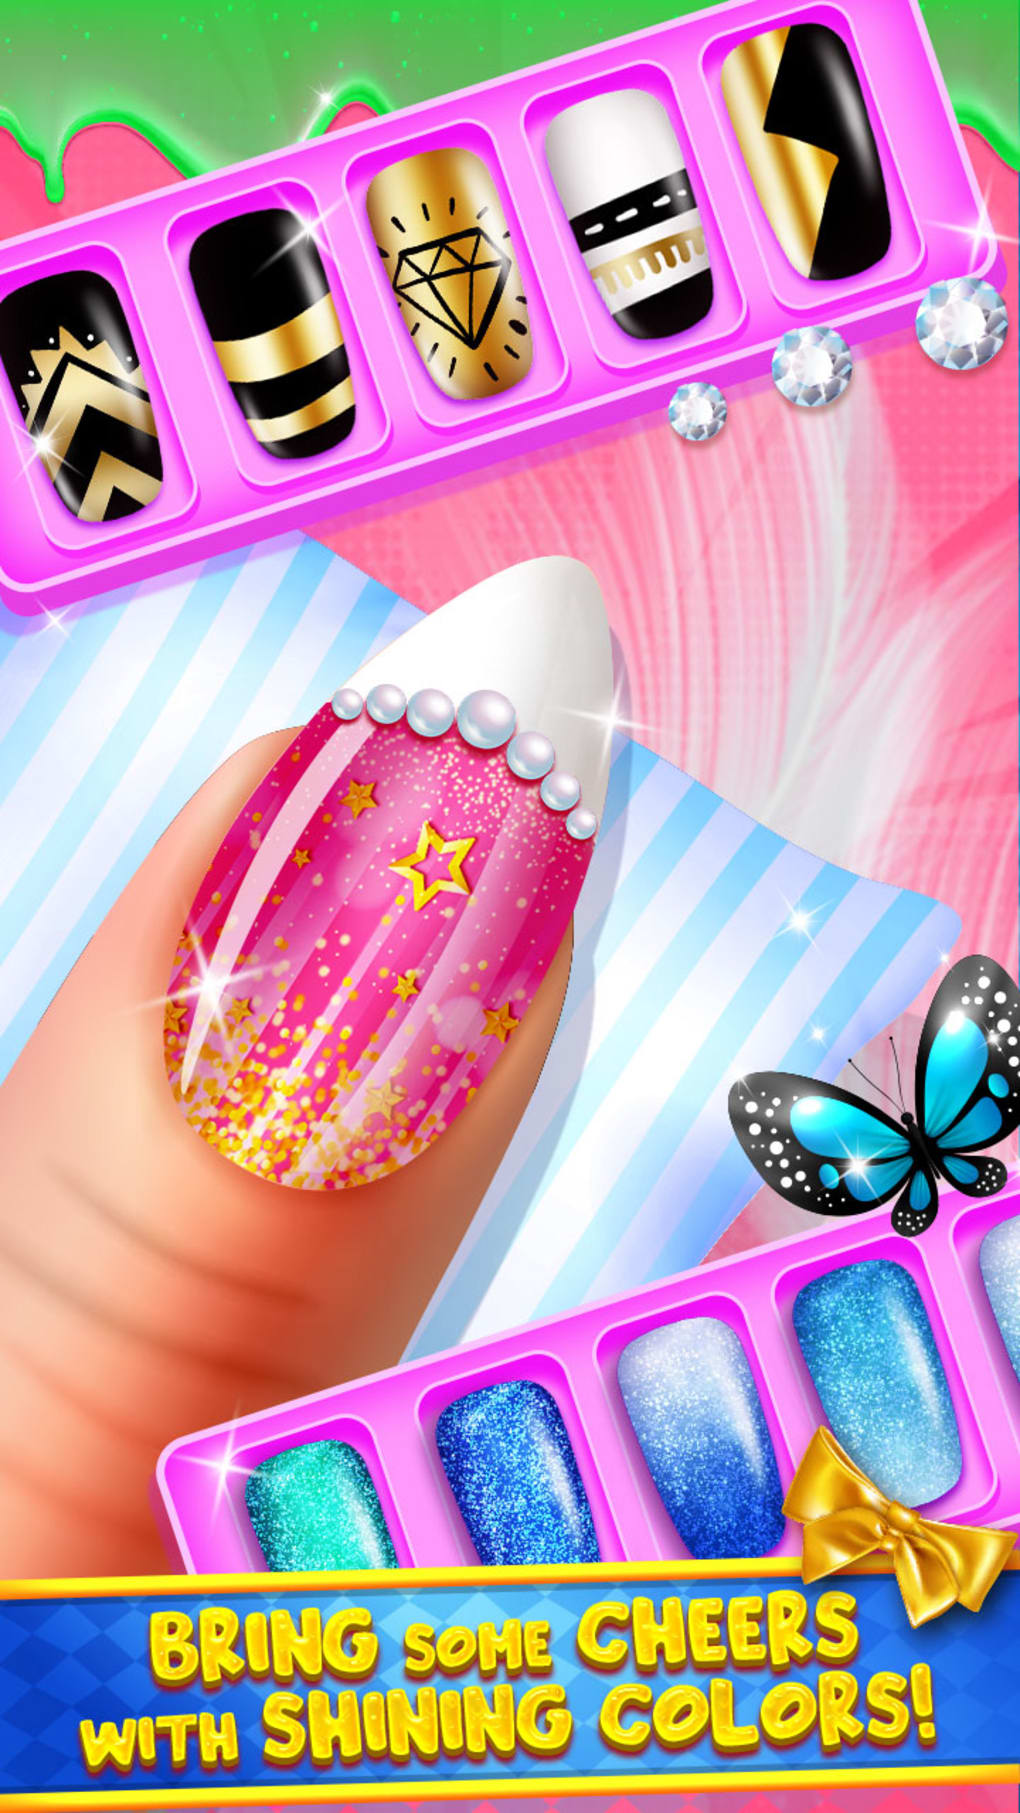 Nail Salon game for girls on the App Store